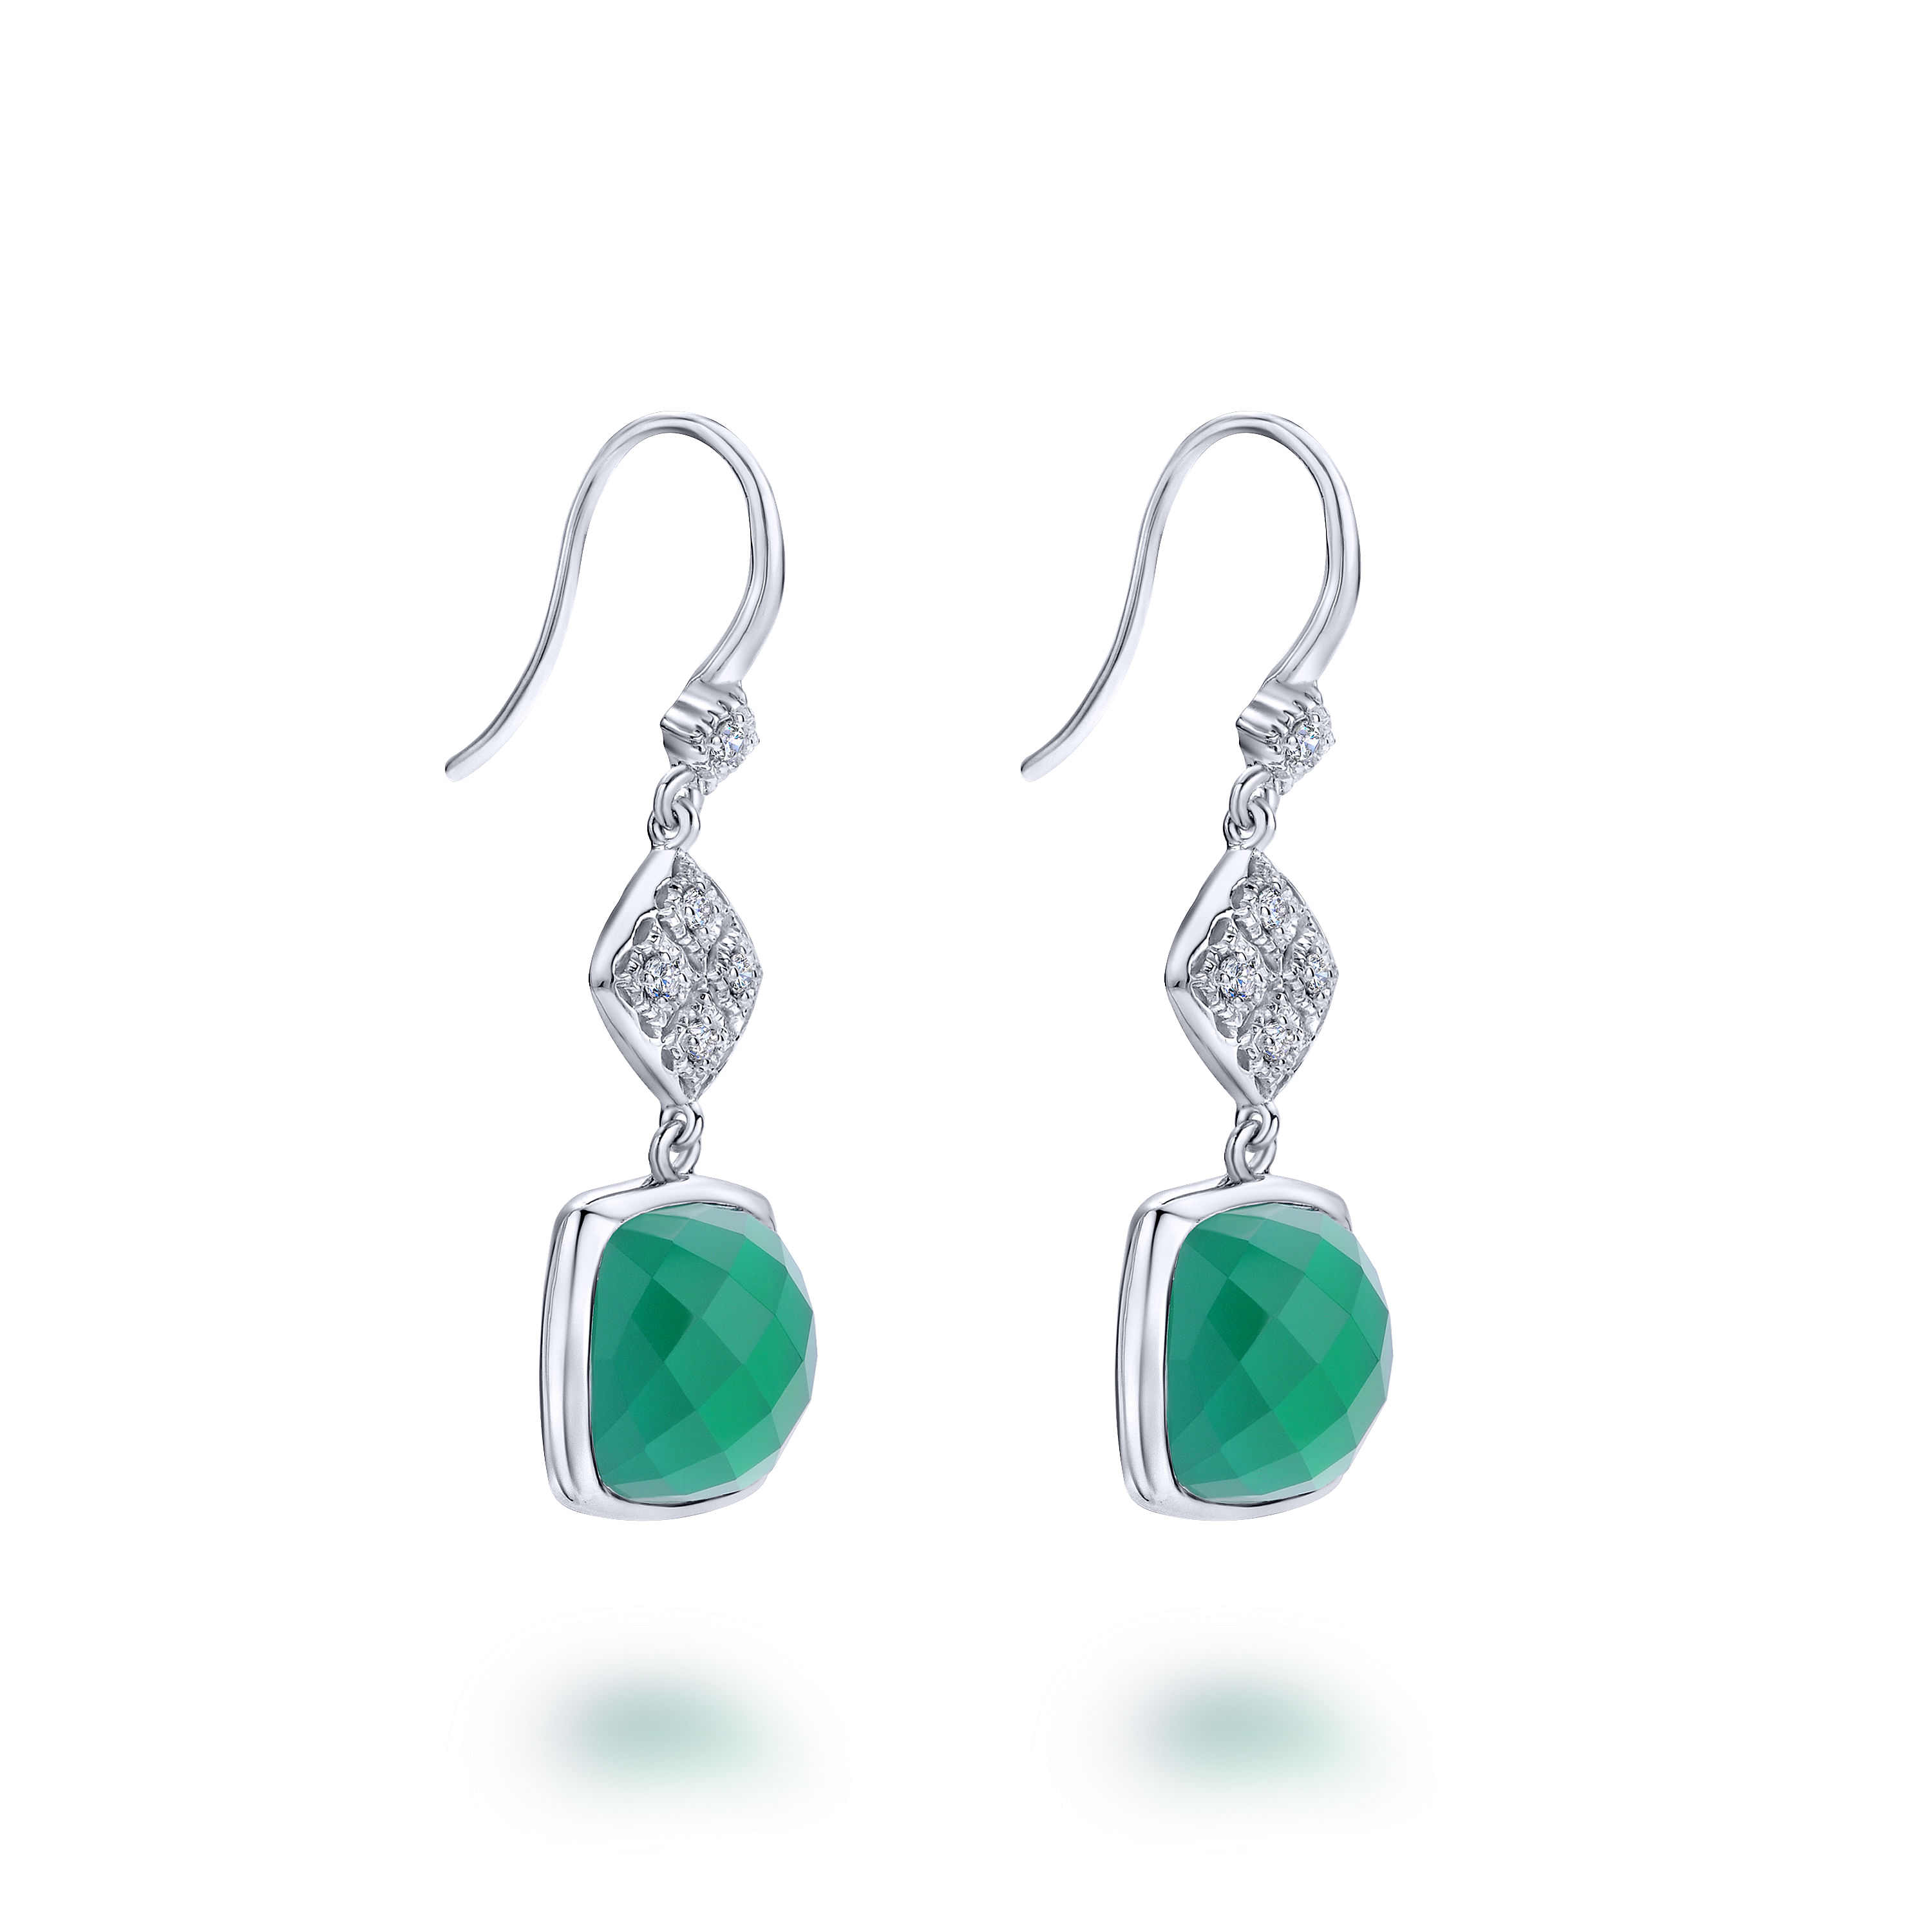 925 Sterling Silver Green Onyx Cushion Drop Earrings with Filigree Tops